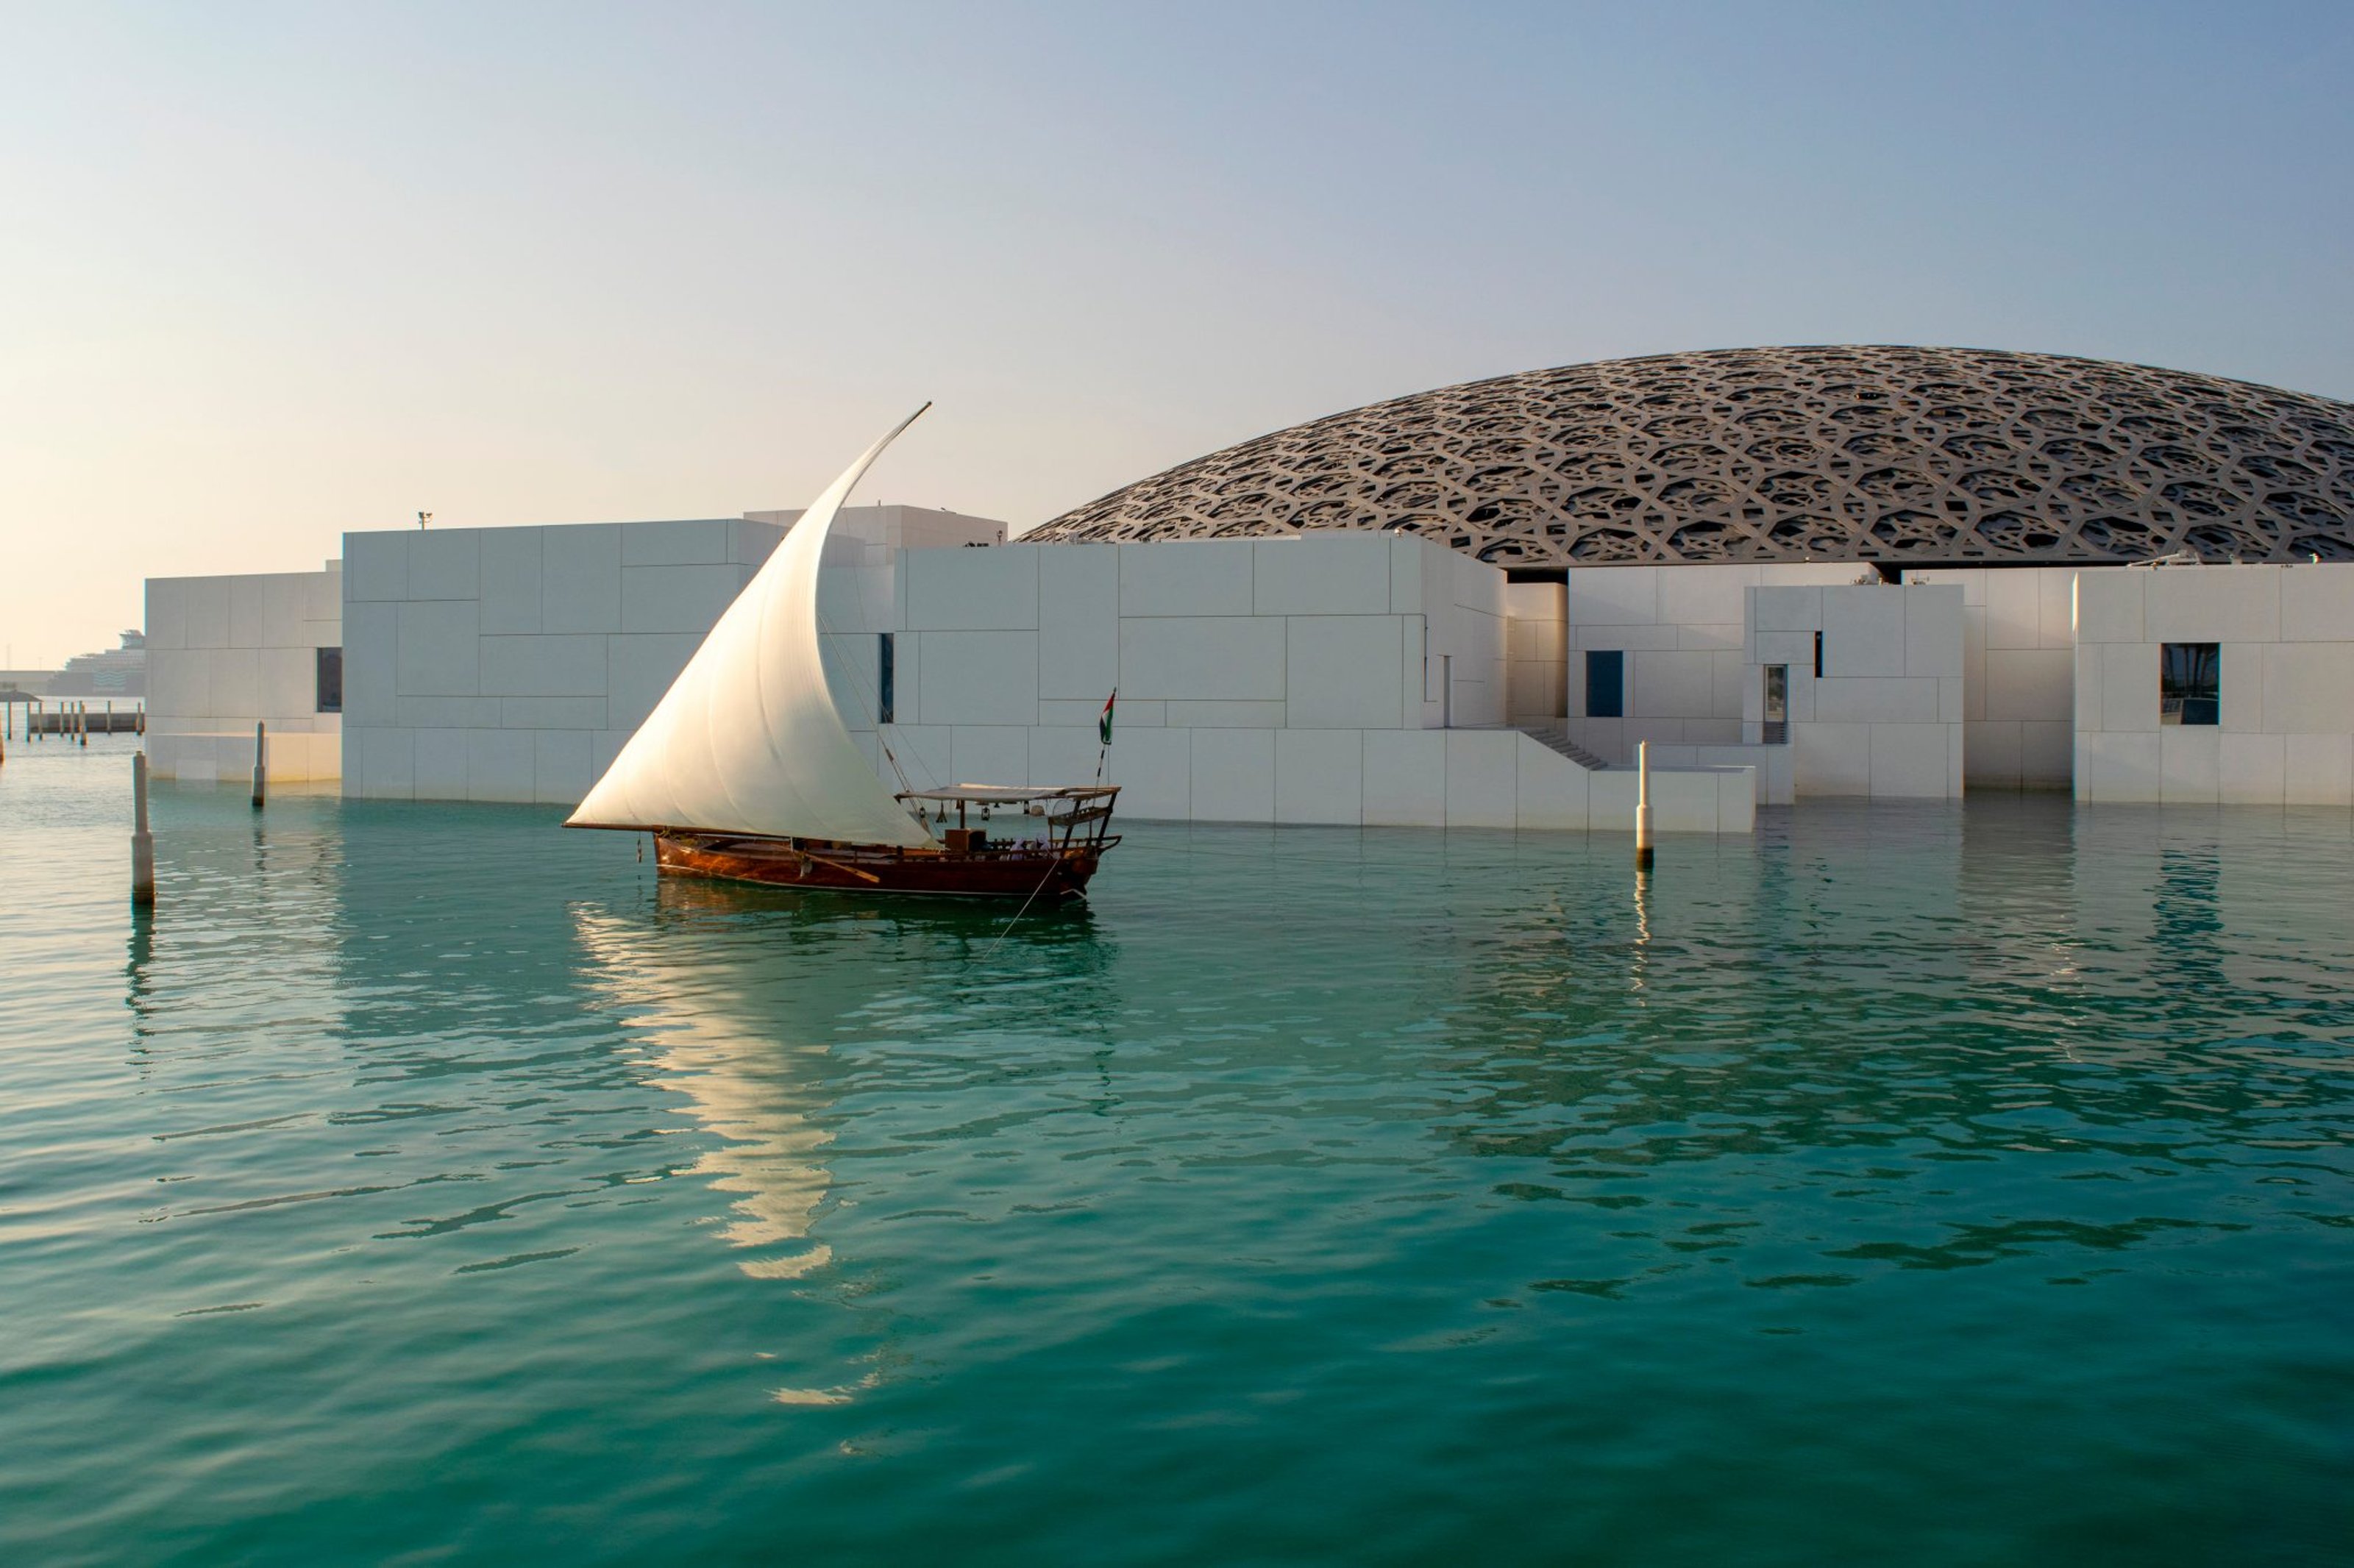 Outside view of Louvre Abu Dhabi, with a lake in front and a white sailboat on the water.